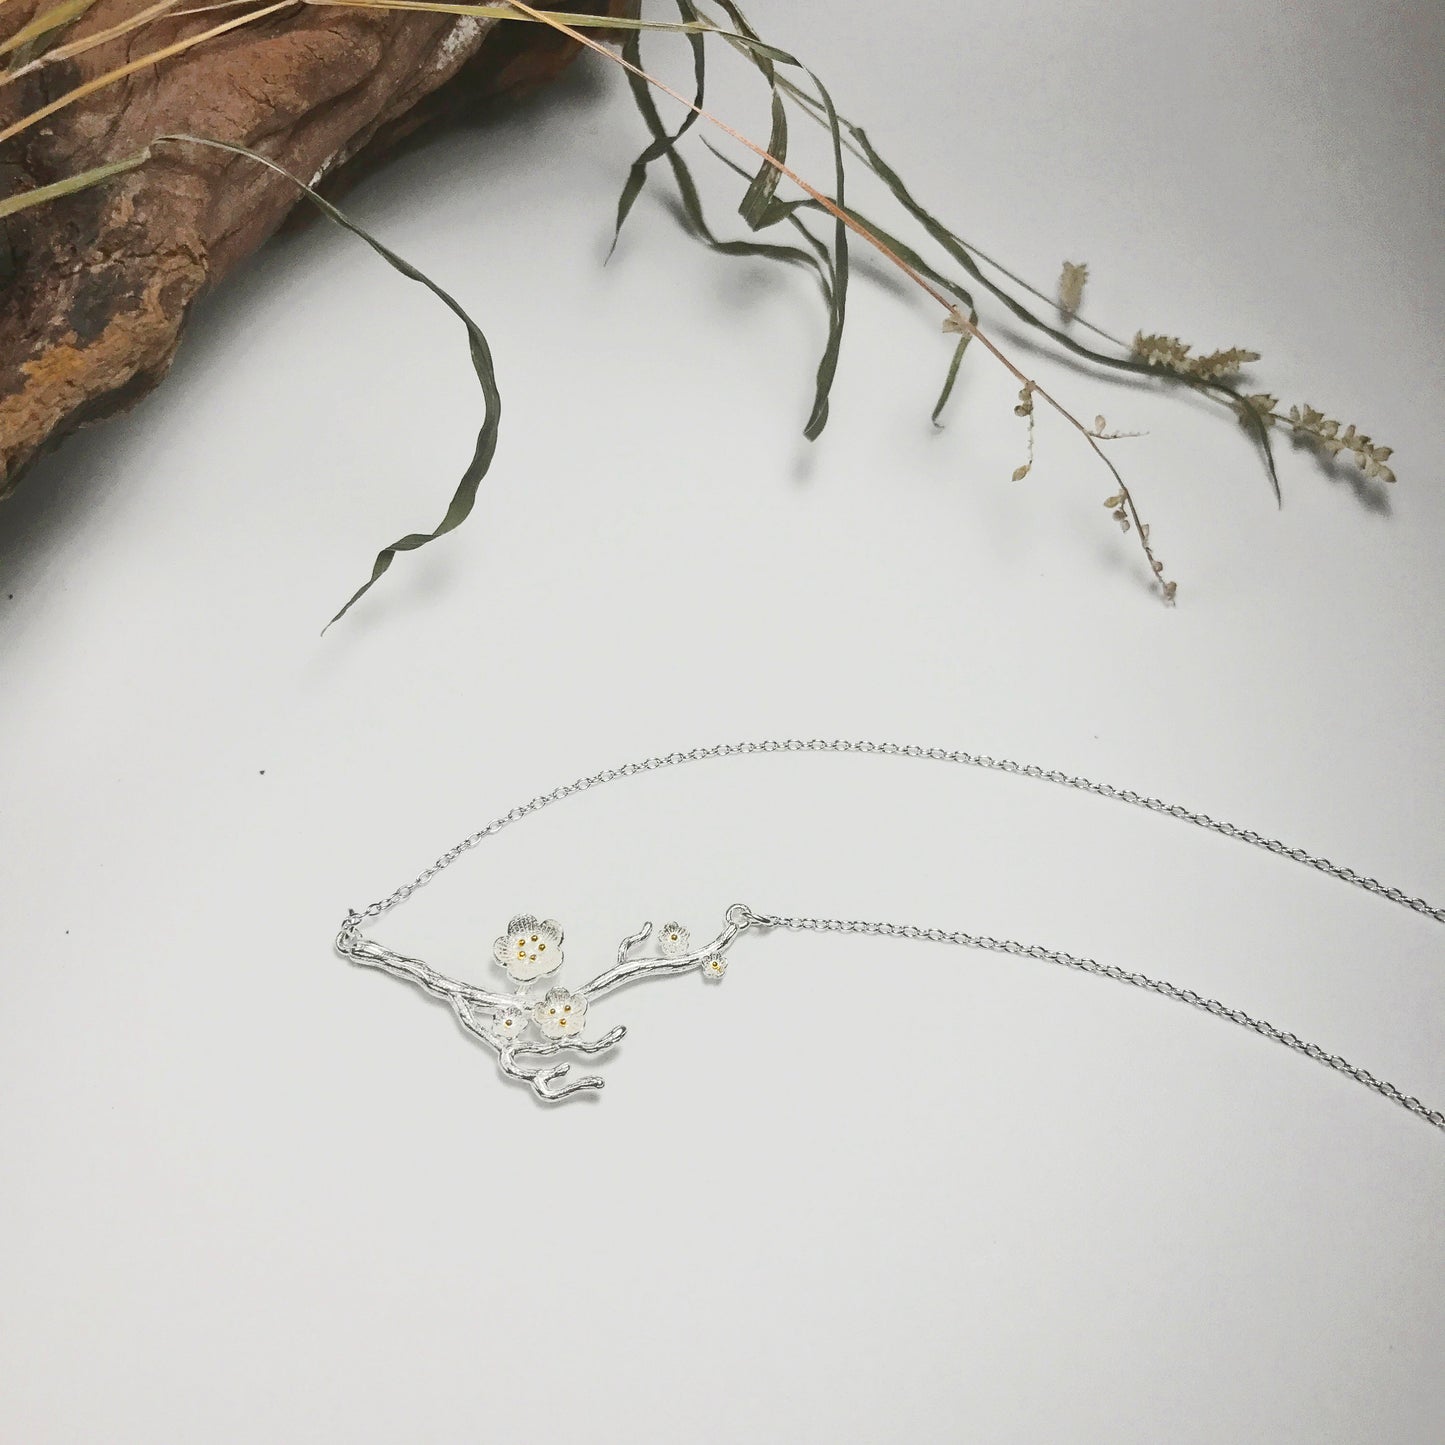 Cherry Blossom Sterling Silver Necklace